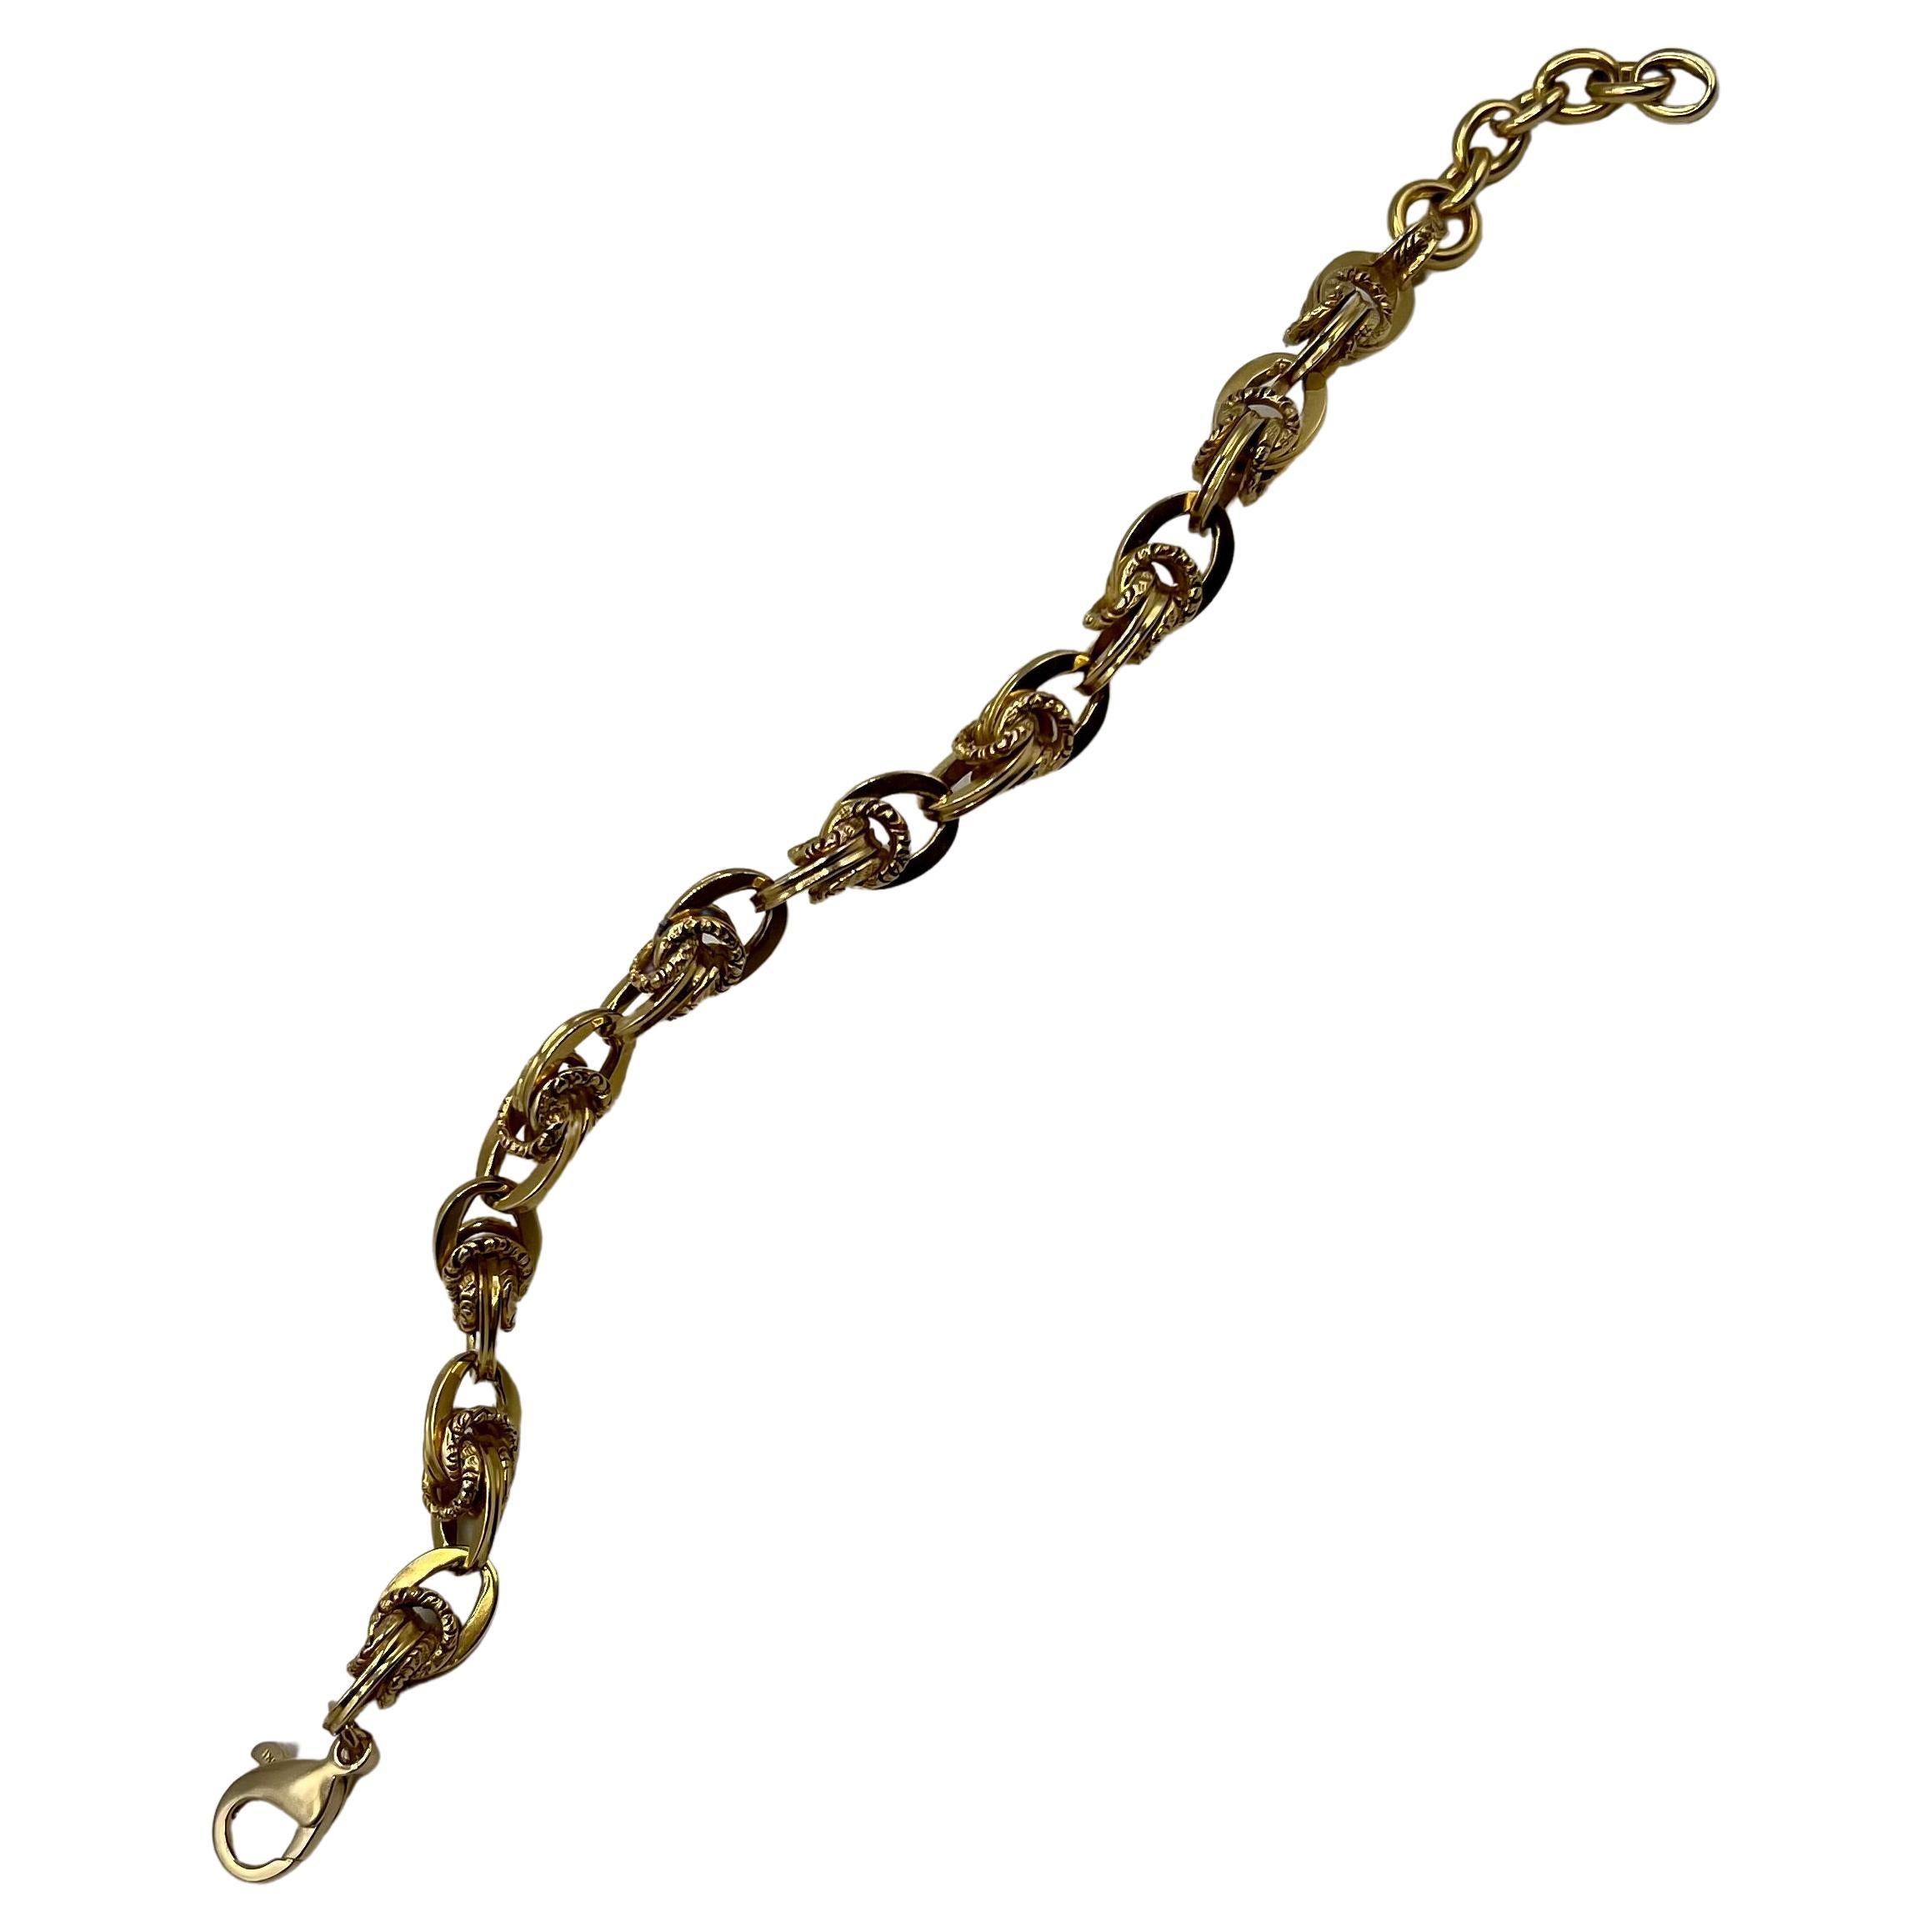 This weighty filigree bracelet has a unique link design. It is a combination of smooth and carved links intertwined. This bracelet is bold enough to stand alone or to layer with a watch or other bracelets. The length is 8 1/4 but can be adjusted